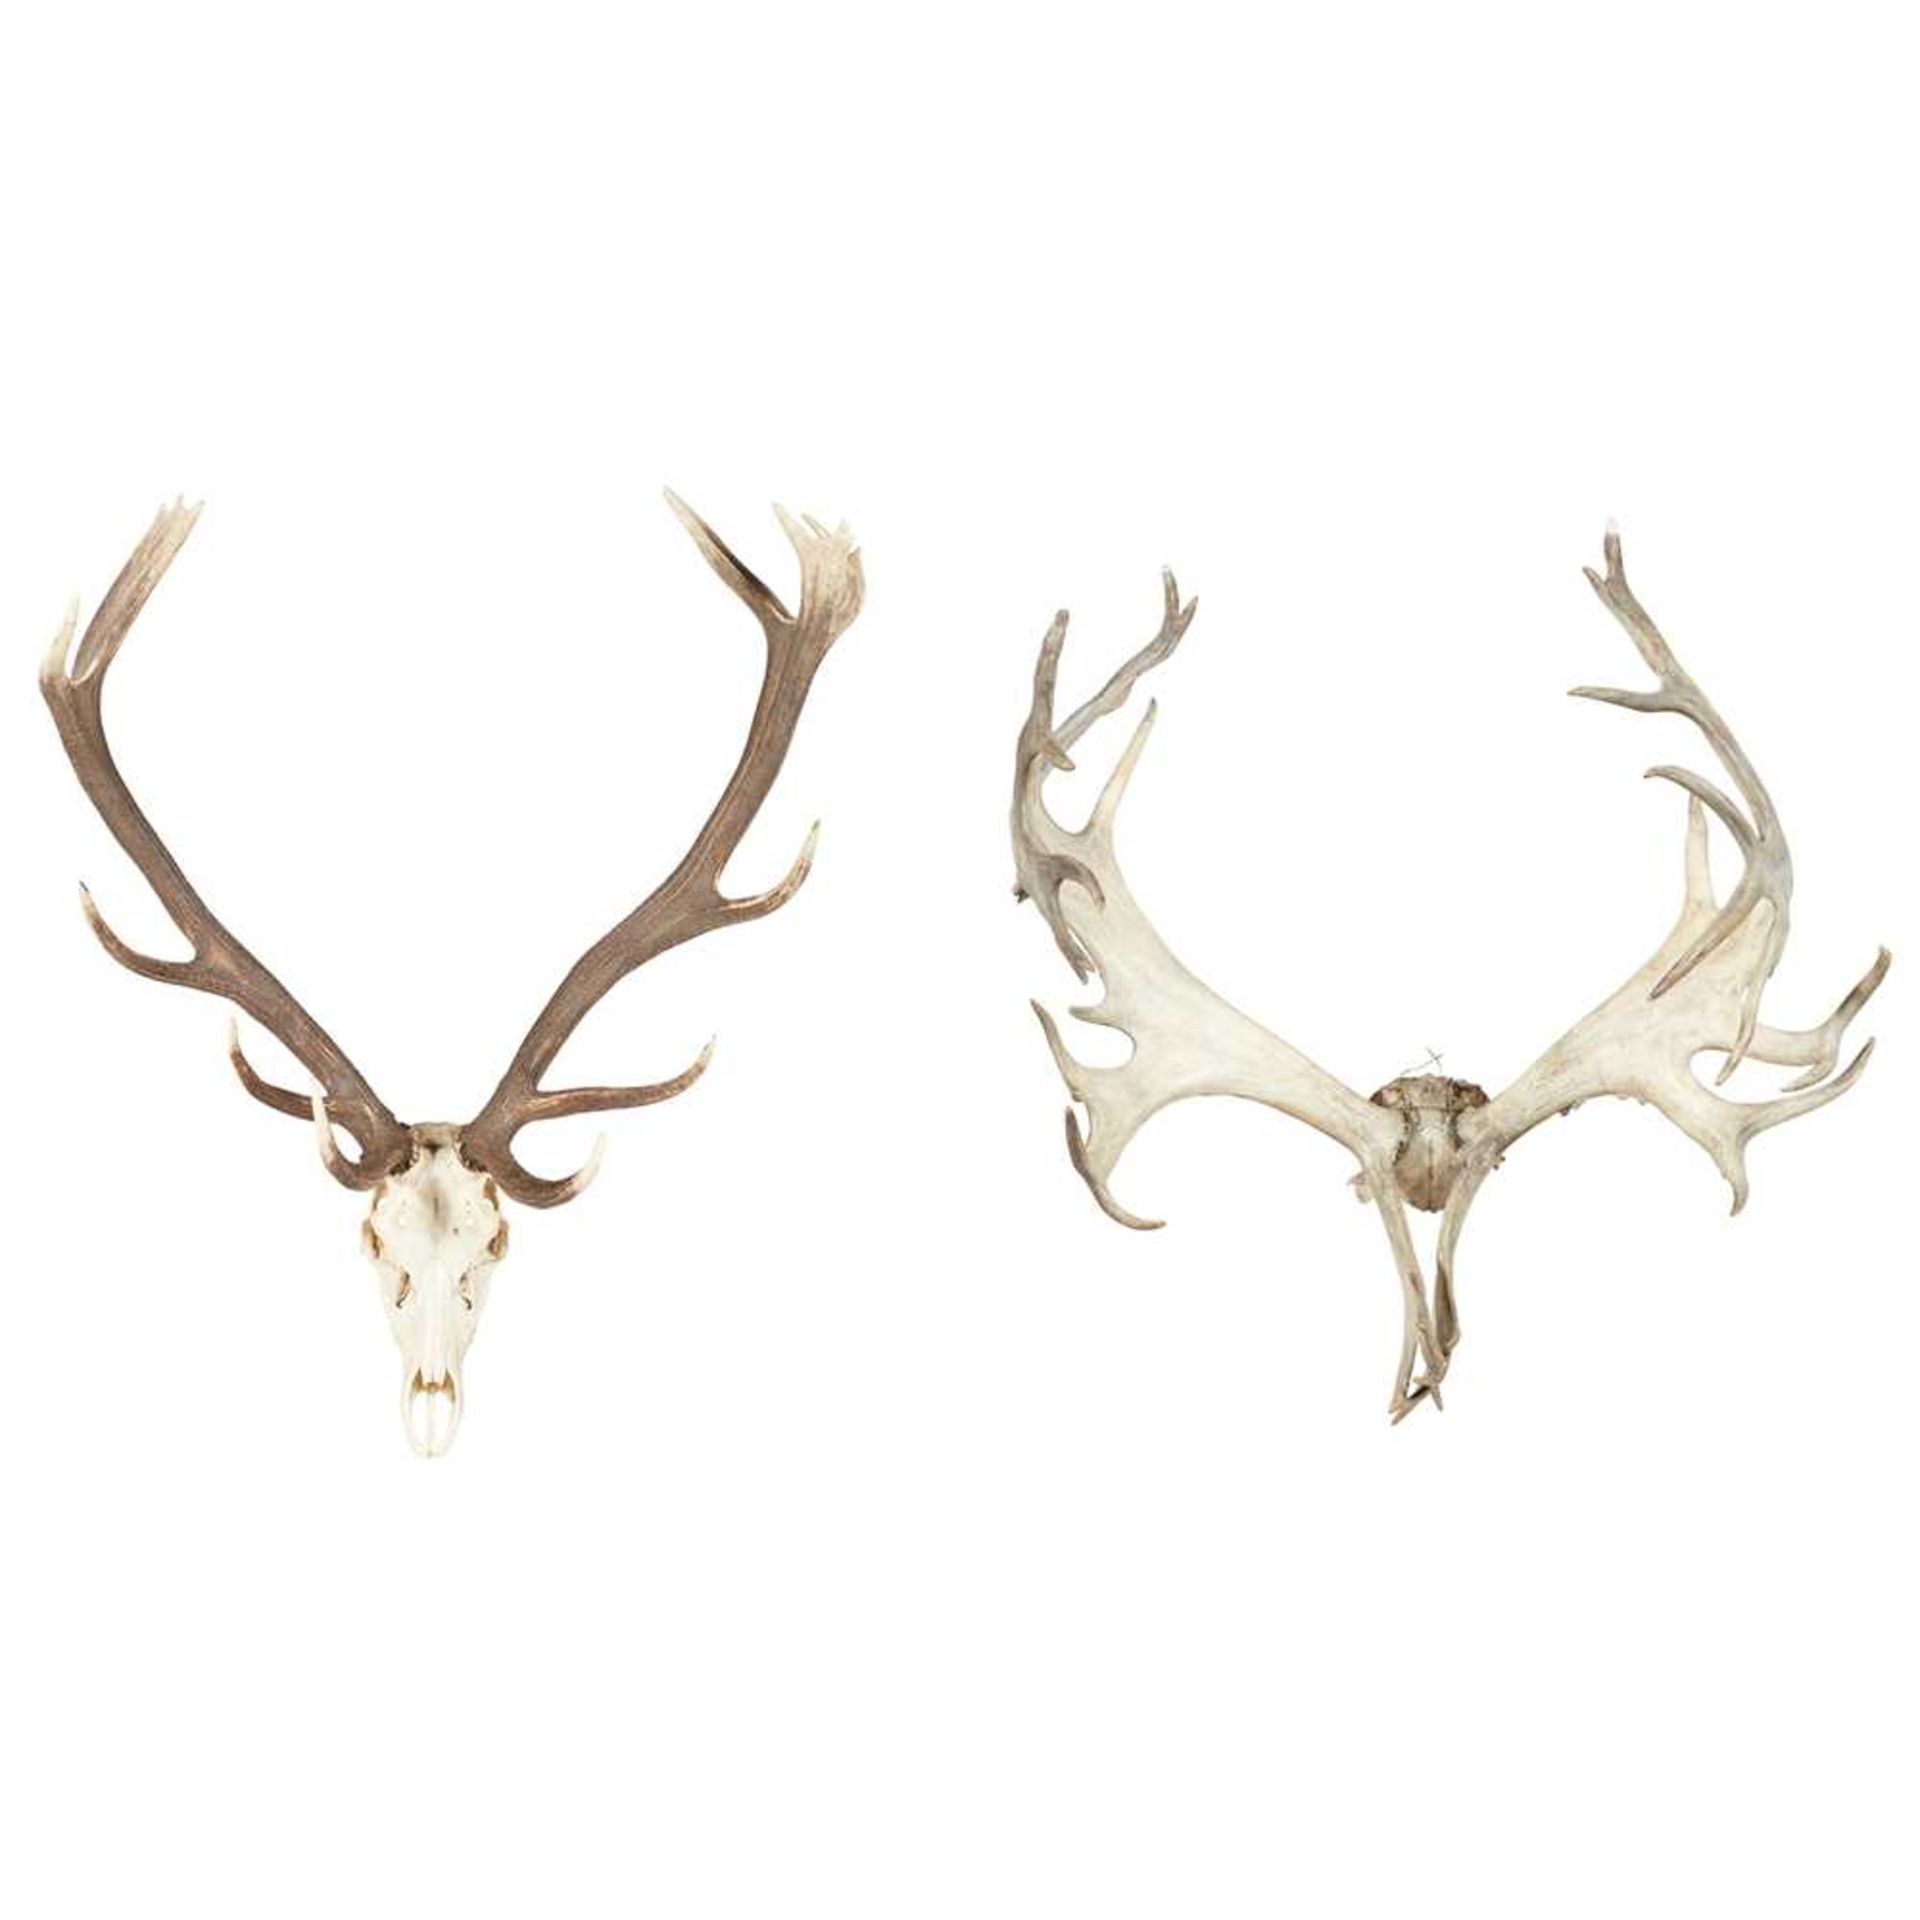 Y TWO SETS OF LARGE TAXIDERMY ANTLERS MODERN